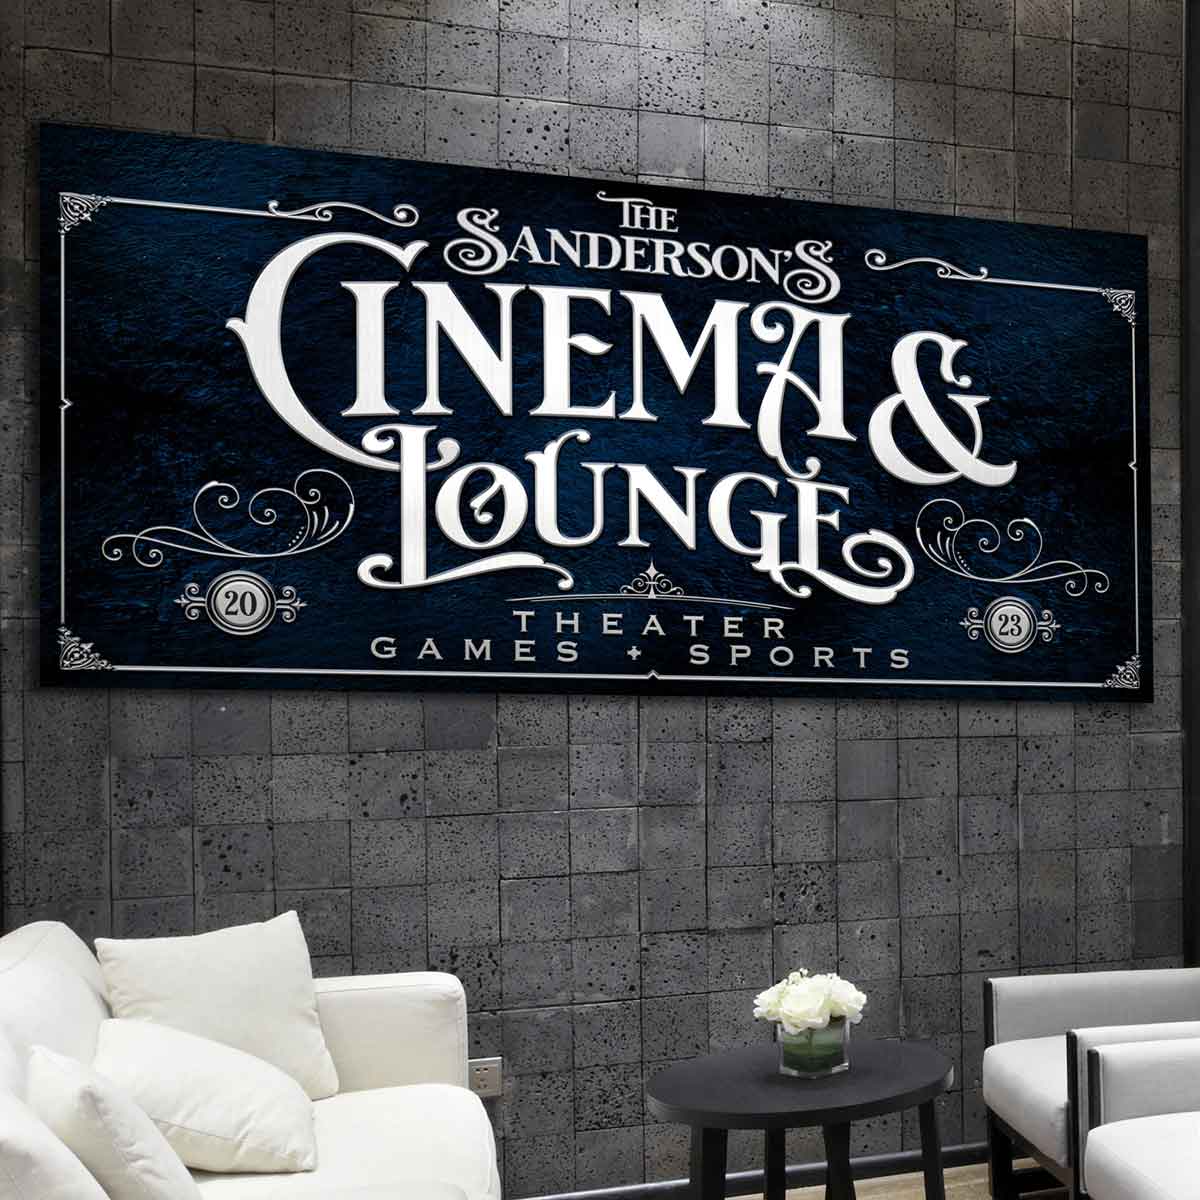 Movie Theater Tapestry, Production Theme 3D Film Reels Clapperboard Tickets  Popcorn and Megaphone, Fabric Wall Hanging Decor for Bedroom Living Room  Dorm, 5 Sizes, Multicolor, by Ambesonne 